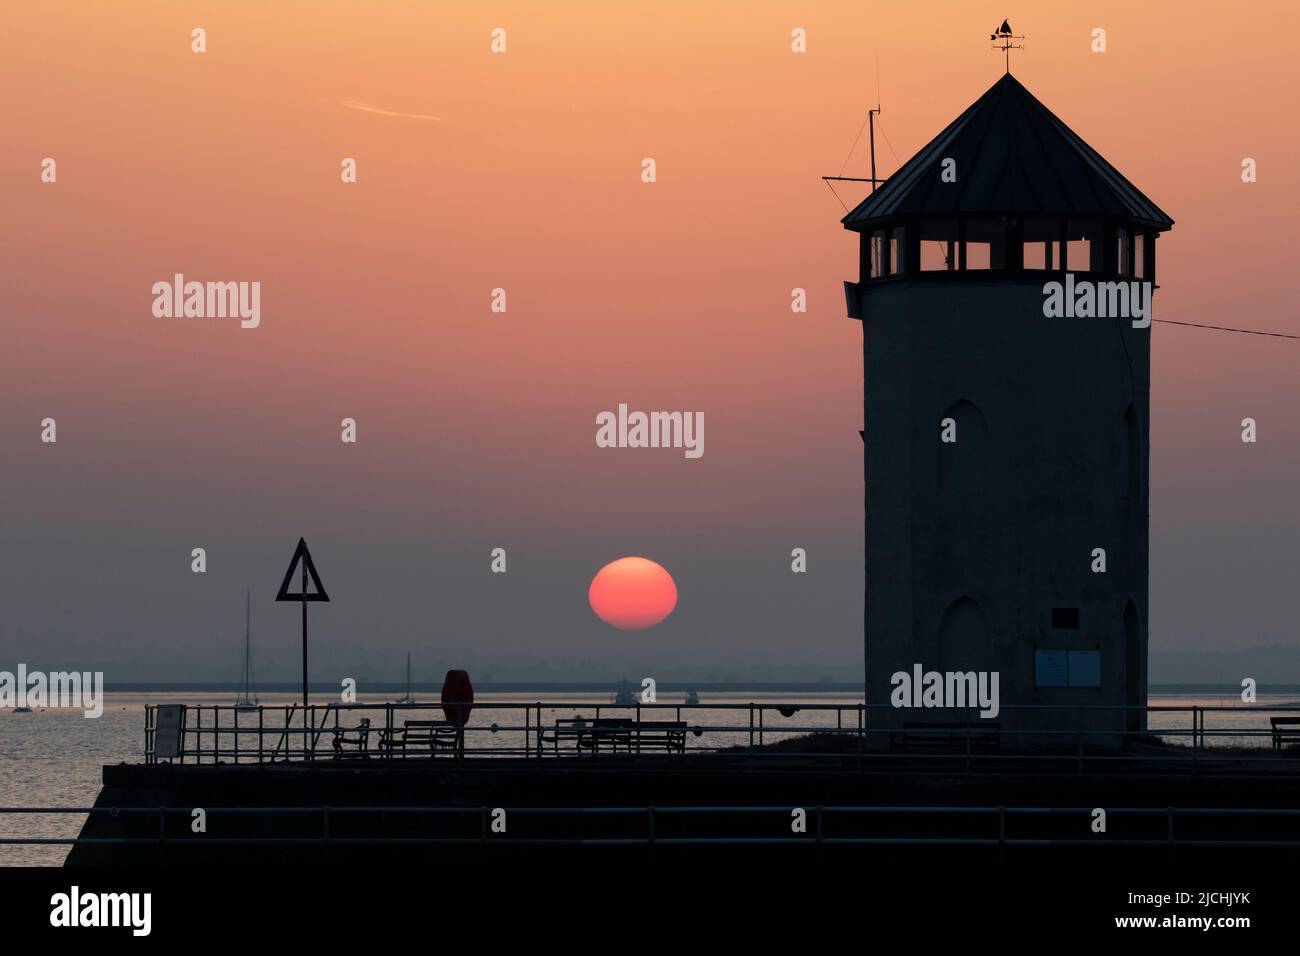 The setting sun at Brightlingsea in Essex UK.  Bateman's Tower in the foreground. Stock Photo